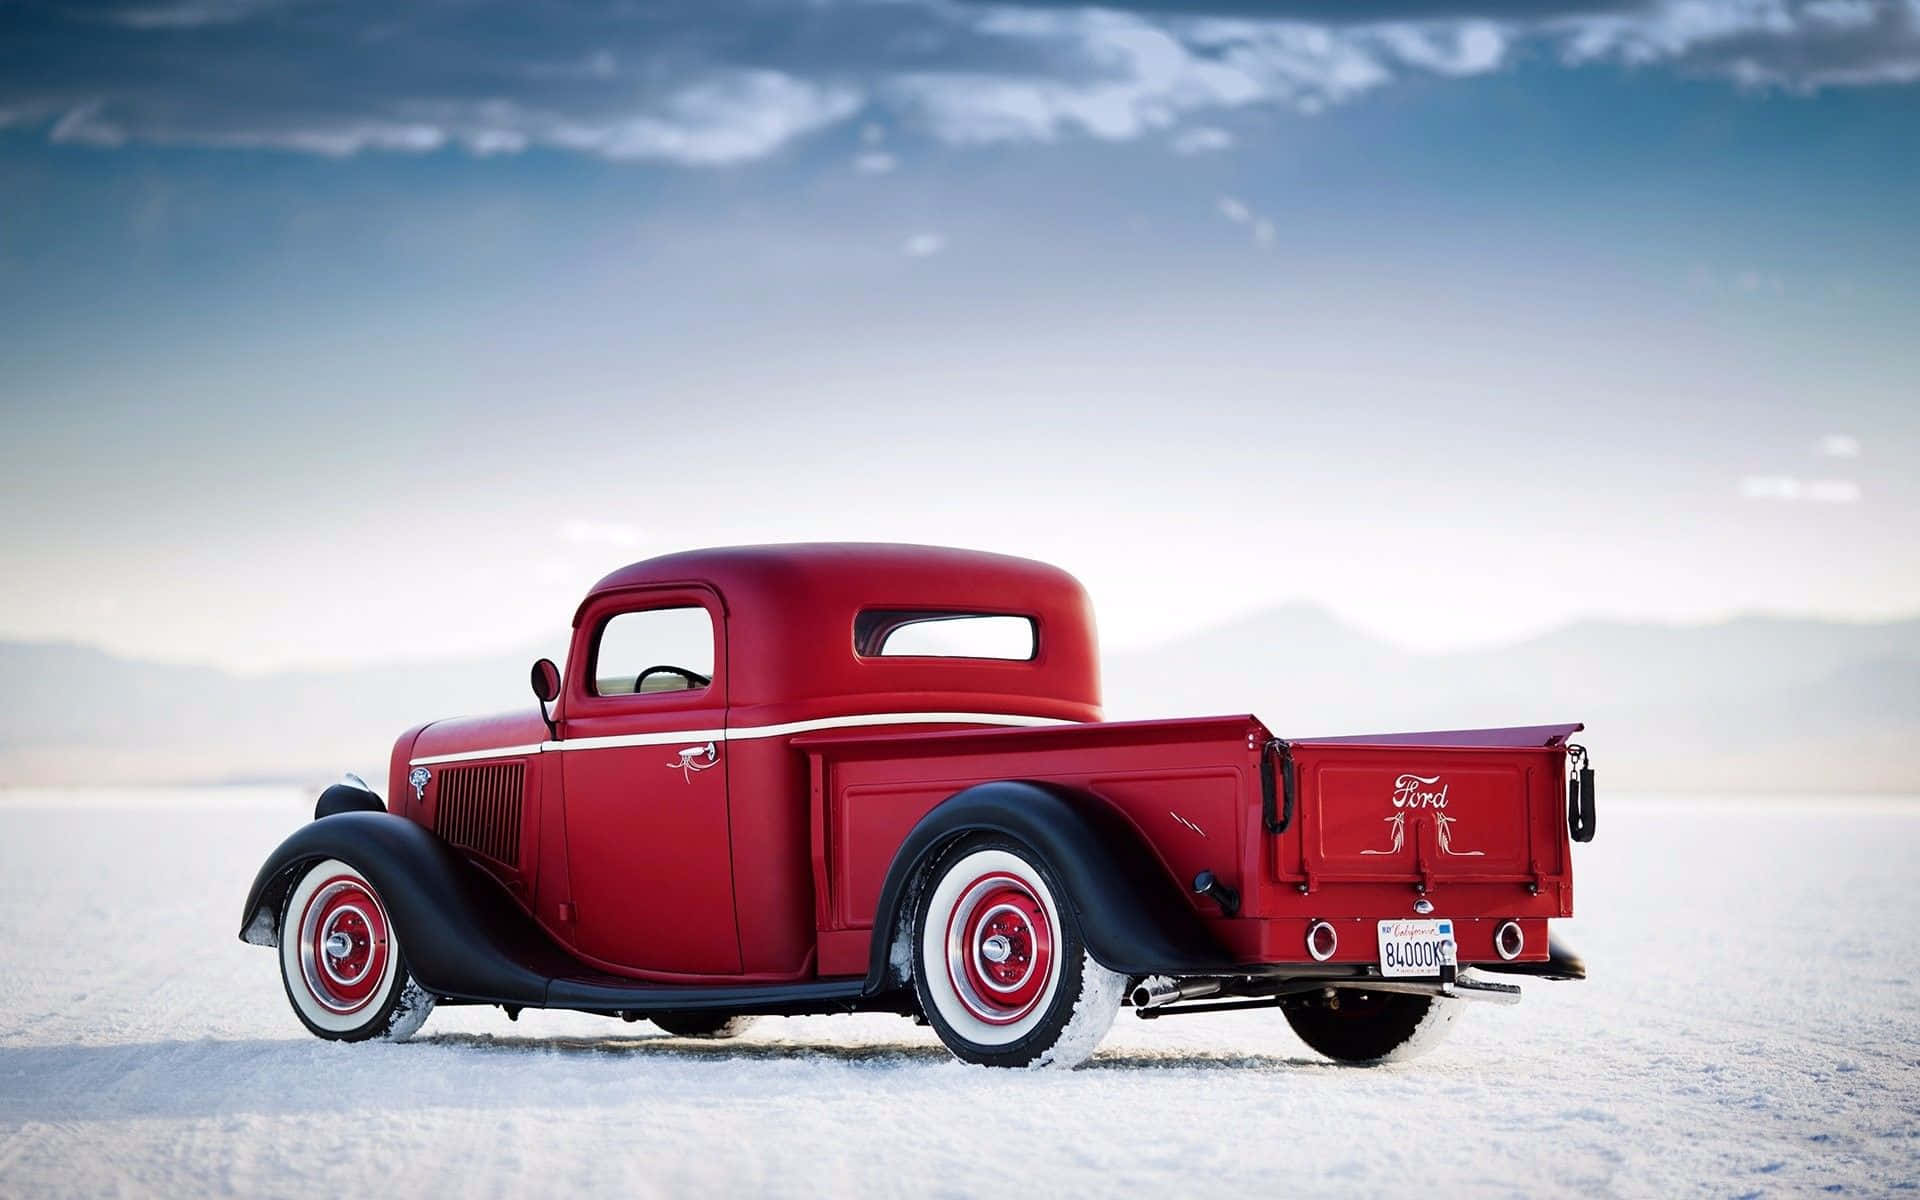 Majestic Red Thames Trader Pickup Truck Wallpaper